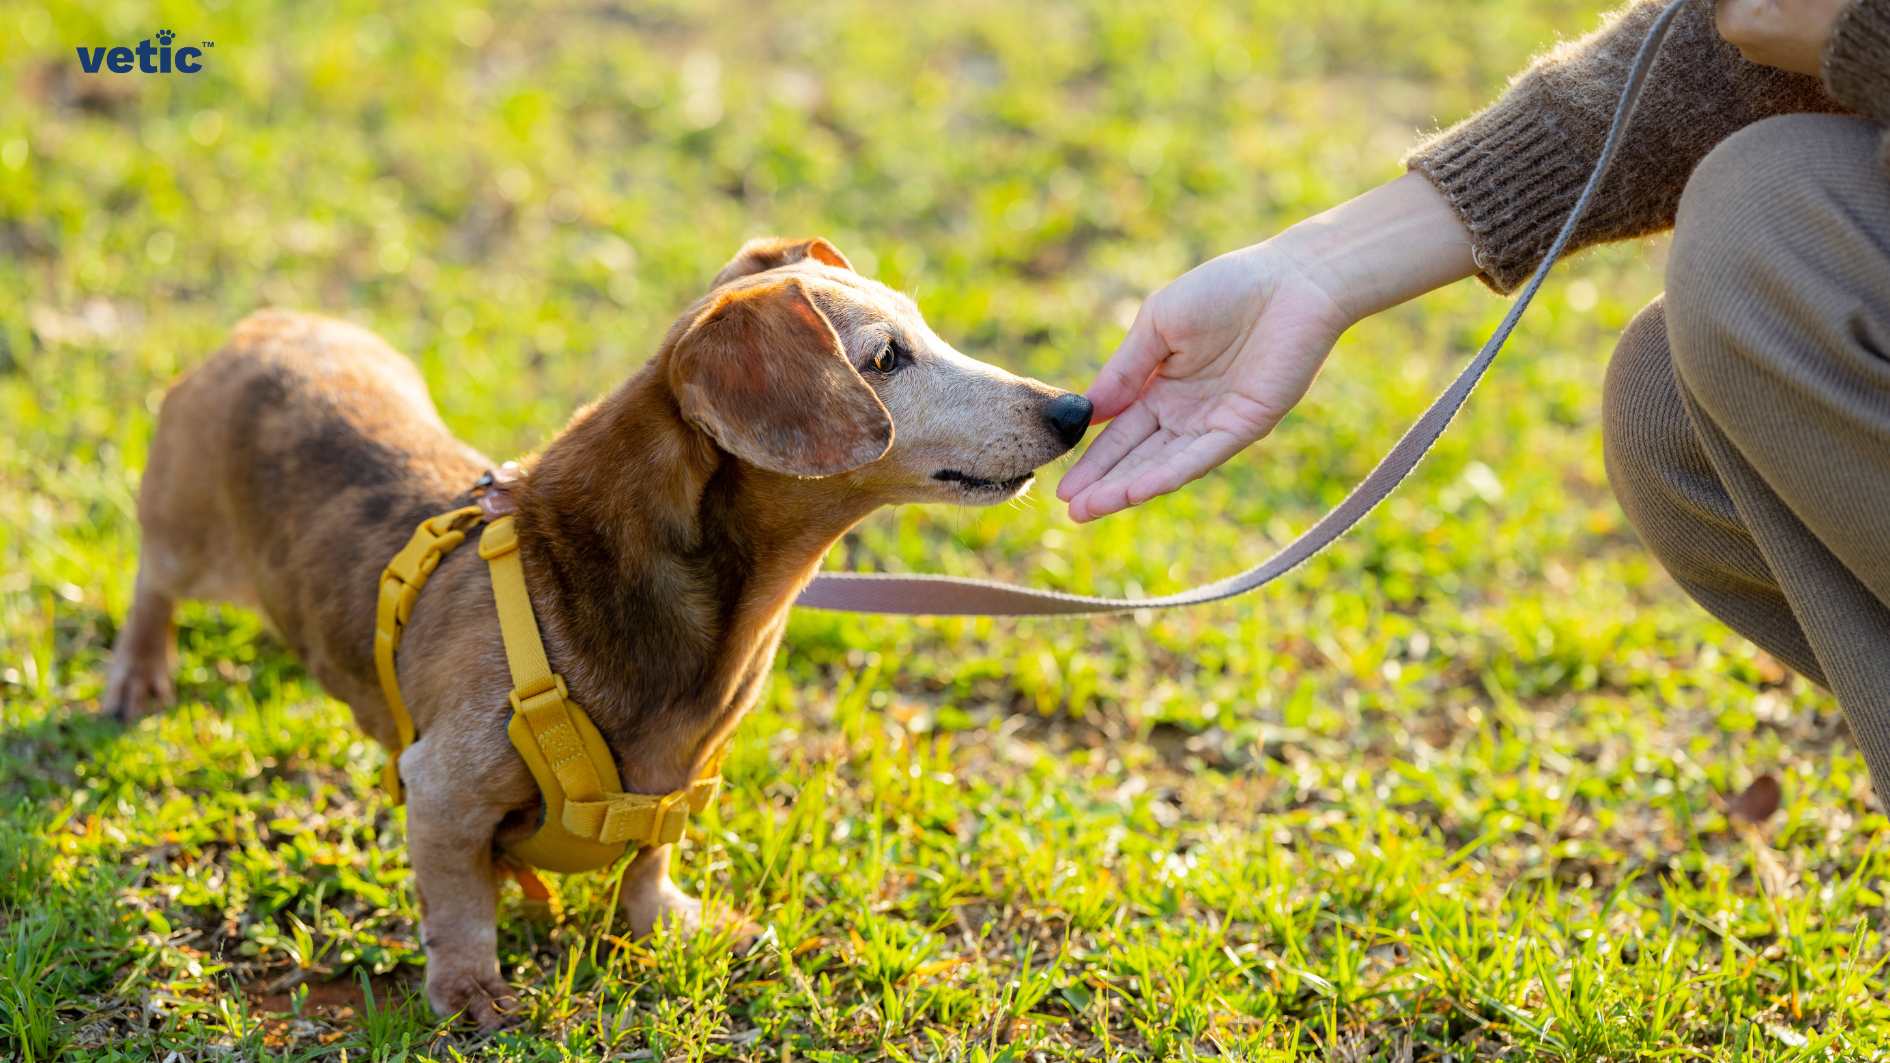 A dog wearing a yellow harness is being trained by a person in an outdoor setting. the image is a part of the blog titled "Adopting a Dachshund" The image captures a training moment between a dog and a person outdoors. The dog, with its brown and white coat, is wearing a yellow harness. The person’s hand is extended towards the dog, holding onto its leash. They are surrounded by green grass with sunlight illuminating the scene. “vetic” is written in the top left corner of the image.